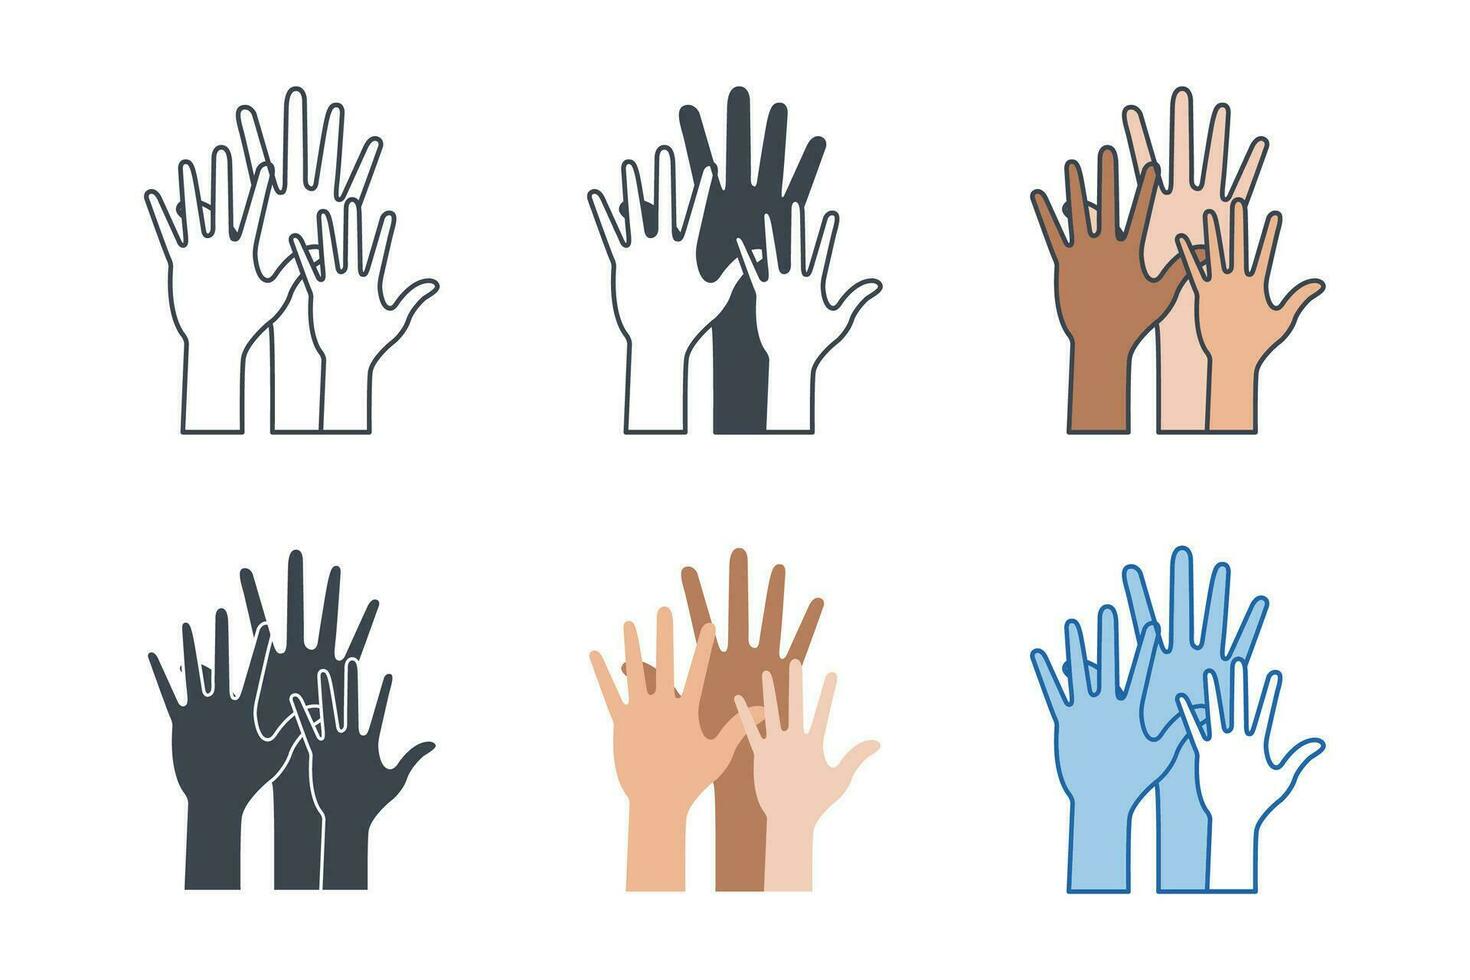 Hands Raised icon collection with different styles. Voting hands icon symbol vector illustration isolated on white background